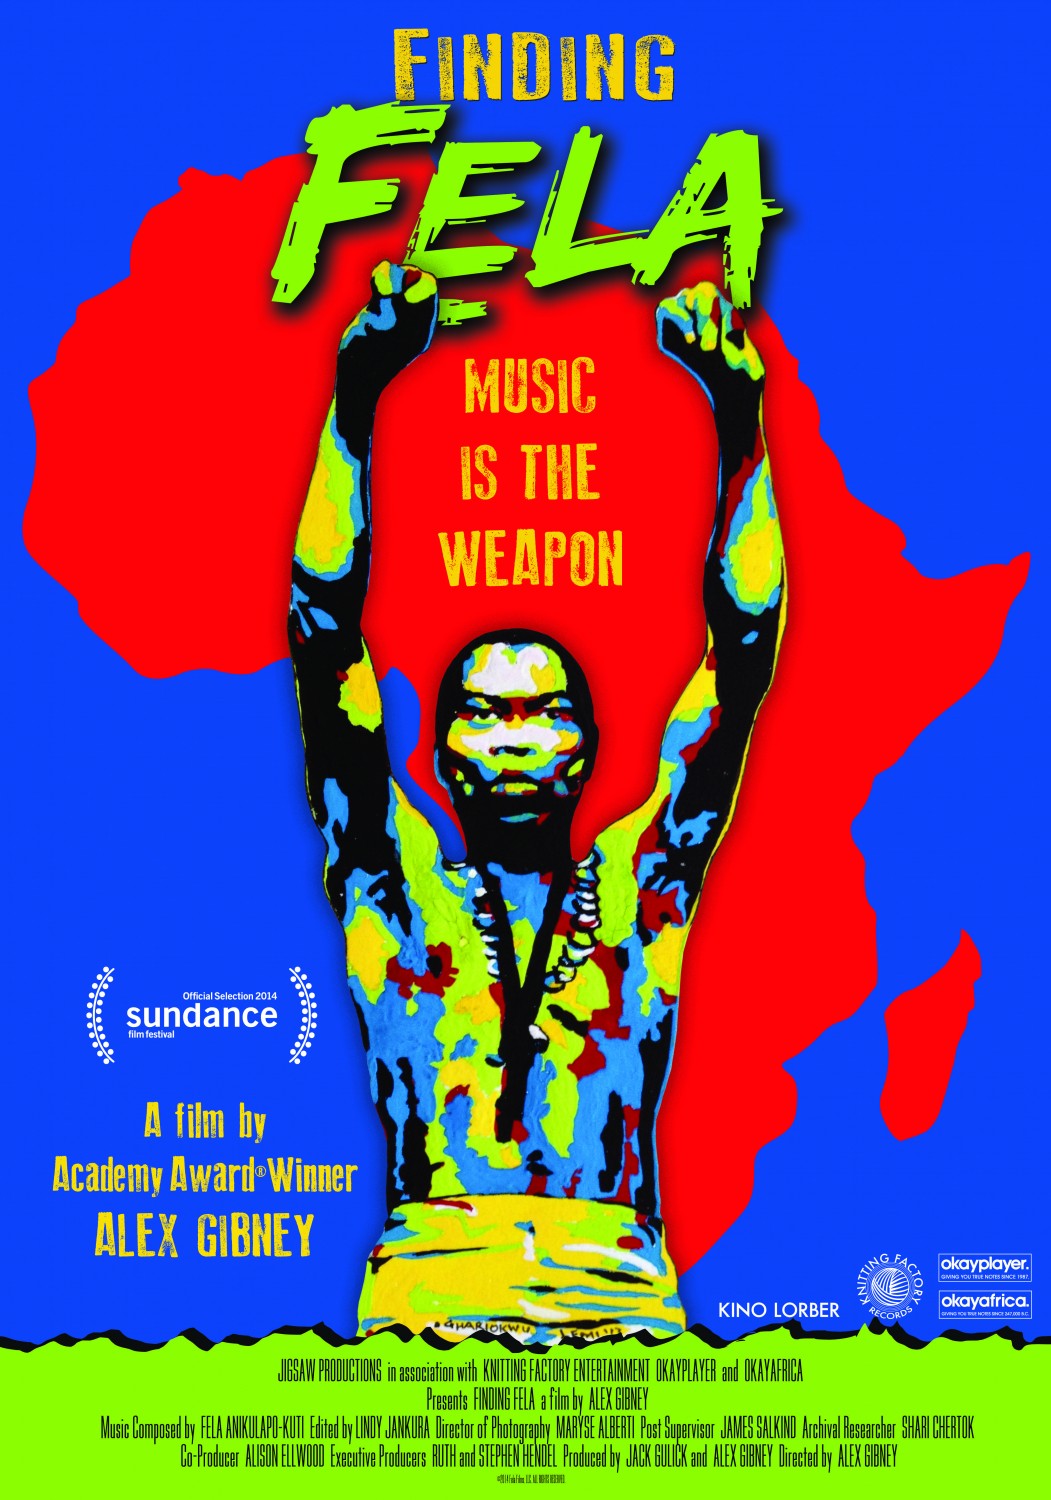 Extra Large Movie Poster Image for Finding Fela! 